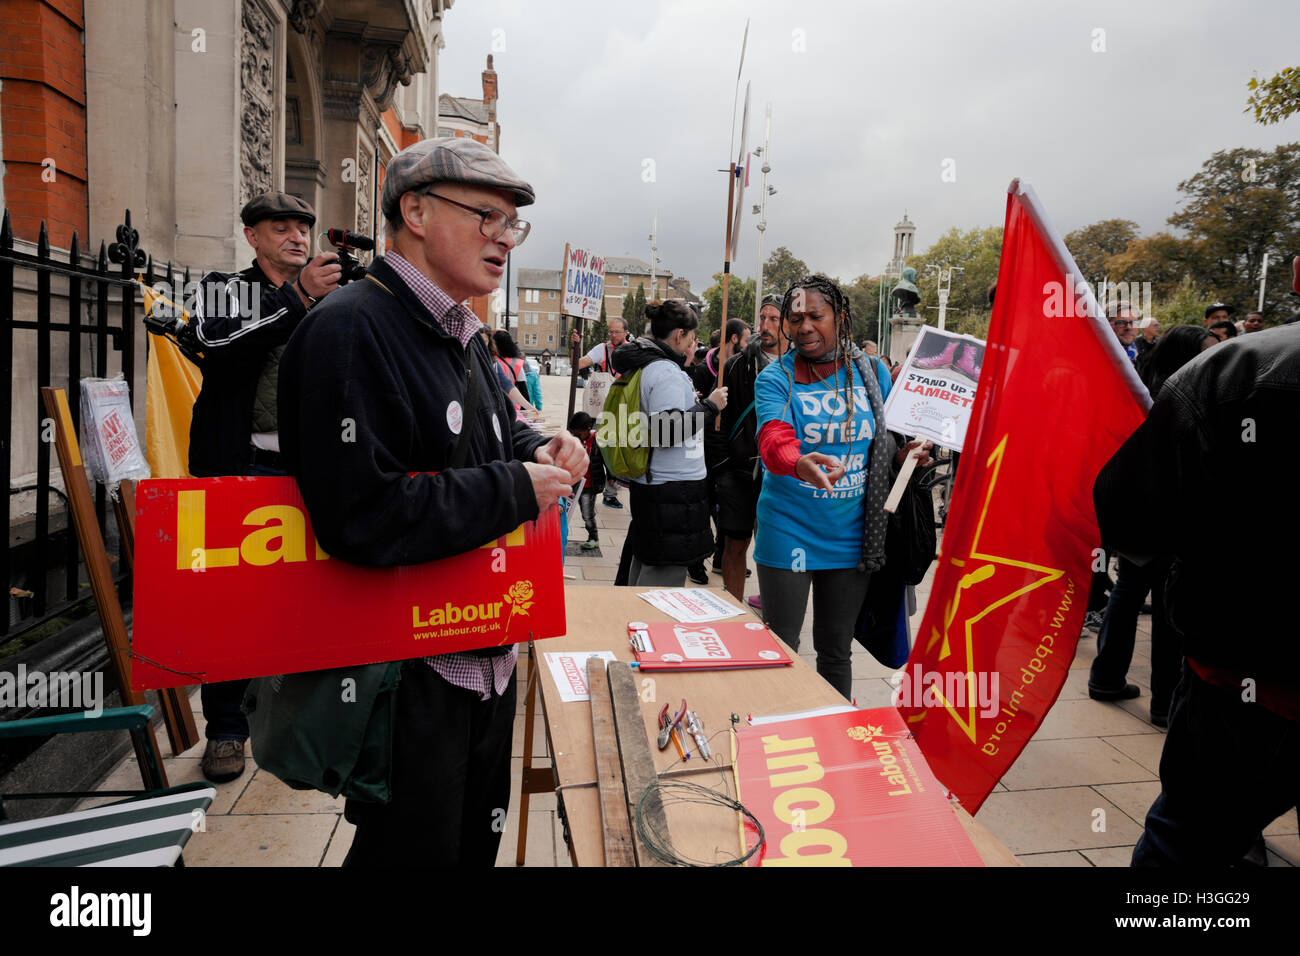 Lambeth, UK. 08th Oct, 2016. Several local campaigning groups have gathered in Windrush Square to demonstrate against Lambeth Council.  There were some tensions with the Labour Party representative. Credit:  Honey Salvadori/Alamy Live News Stock Photo